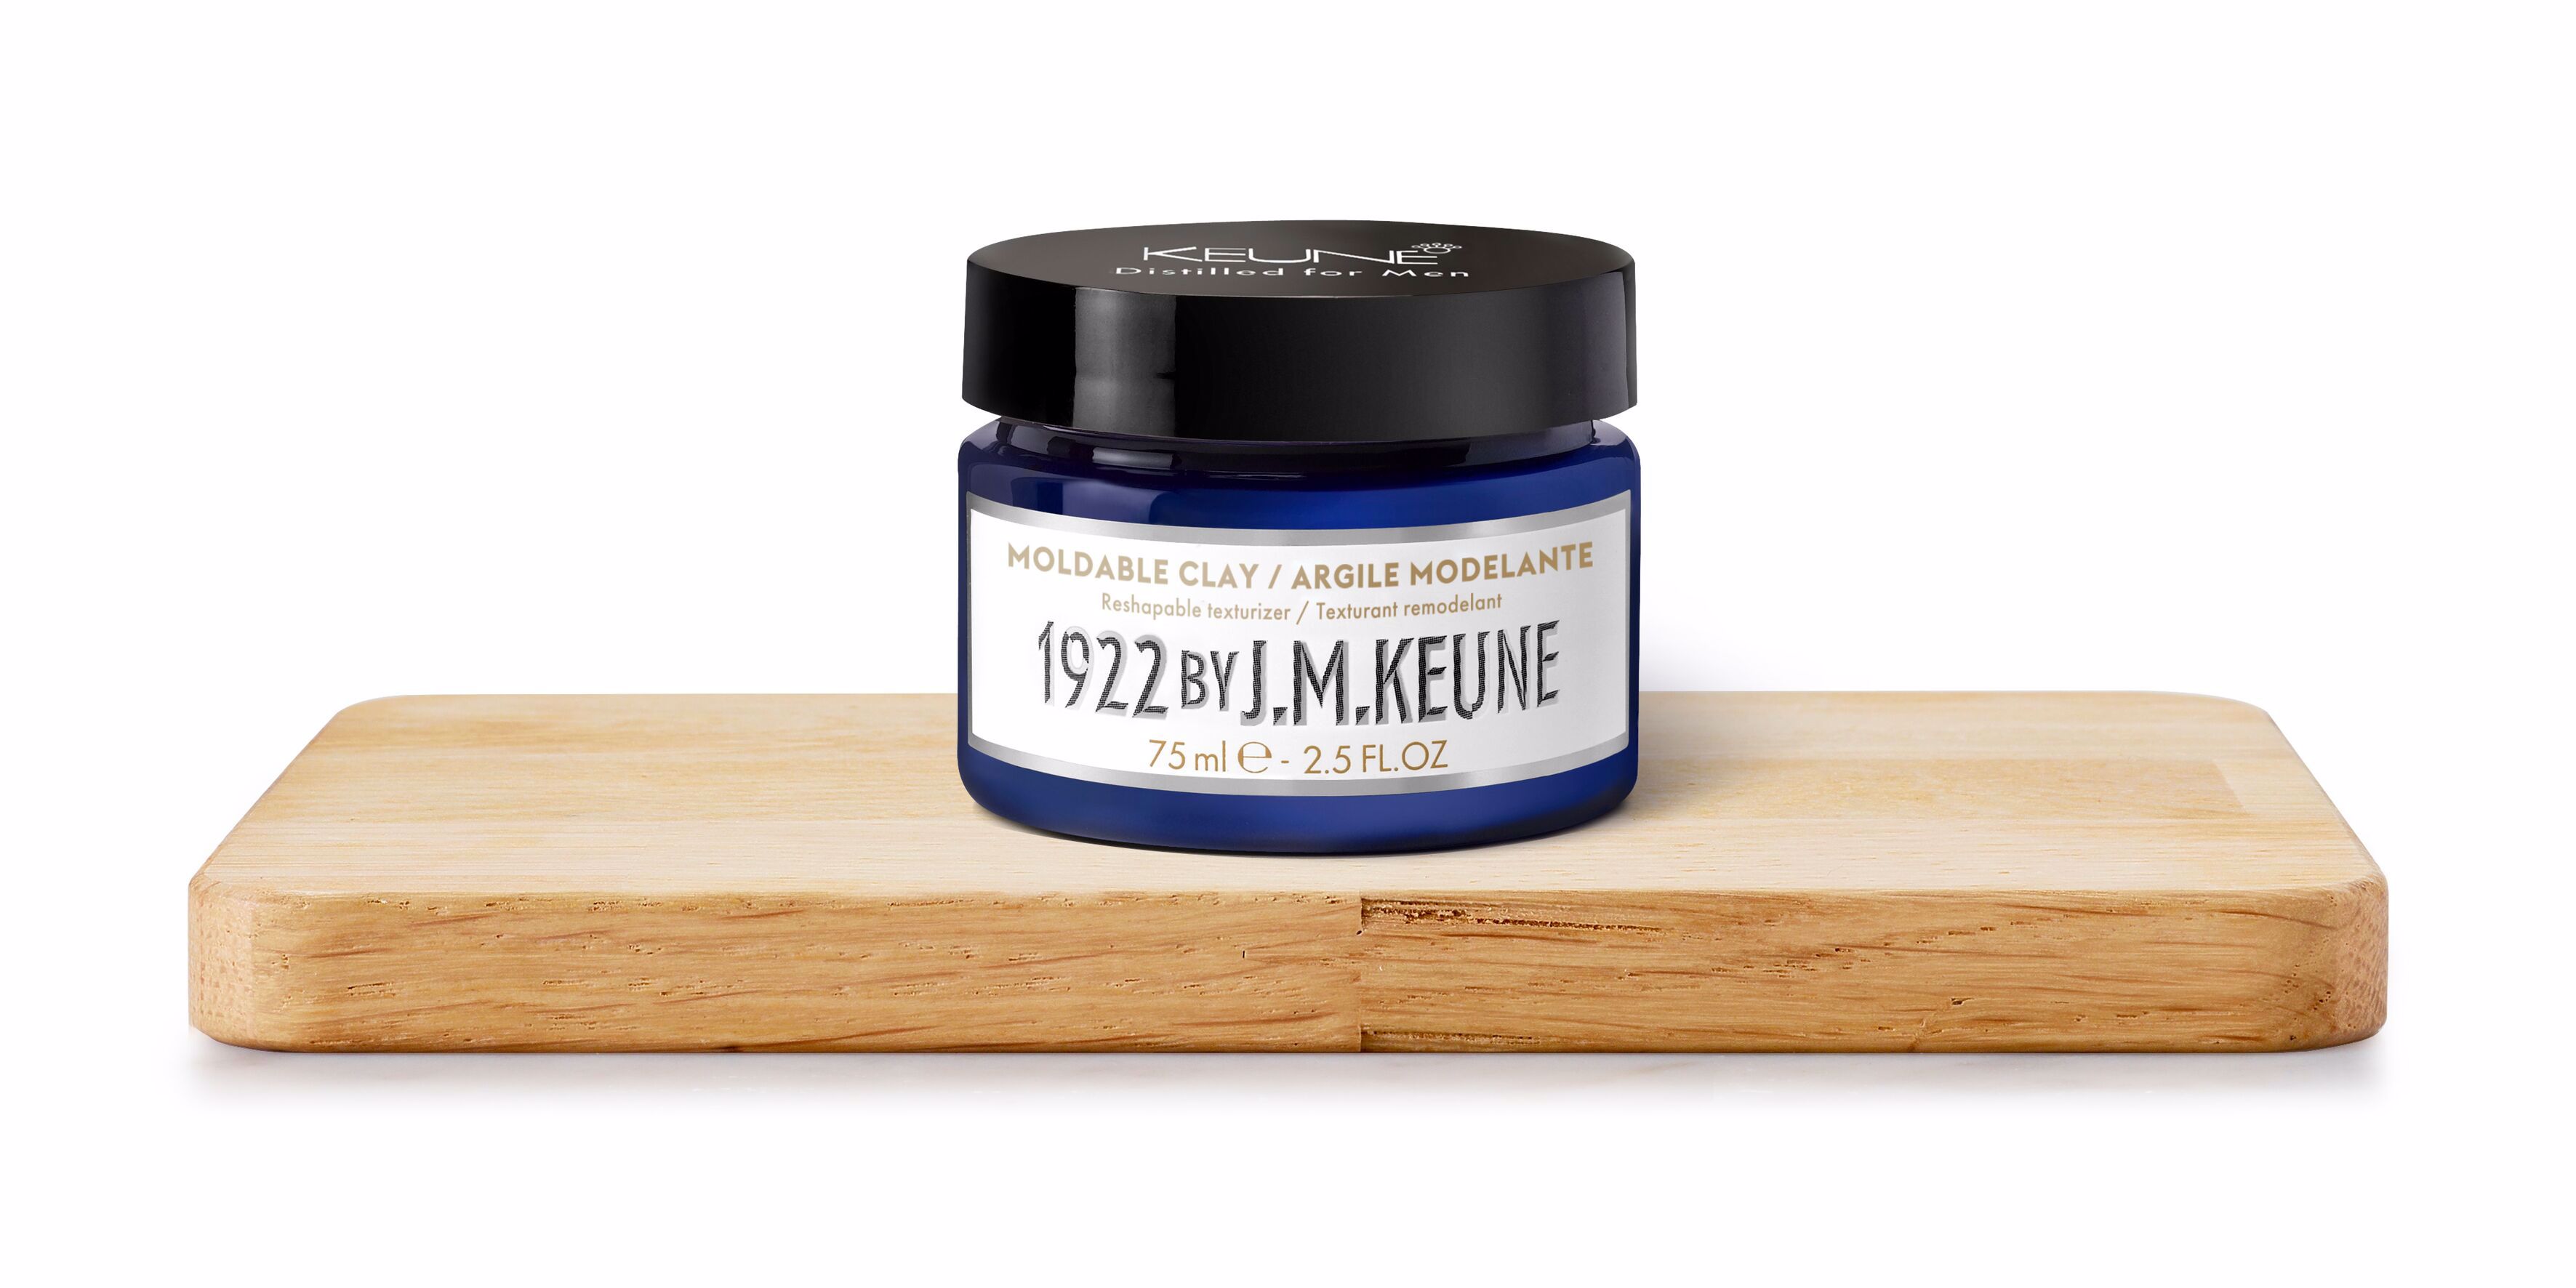 Discover 1922 MOLDABLE CLAY – the perfect hair product for men. Effortlessly style and restyle with strong, flexible hold and a matte finish. Enriched with creatine. Now available on keune.ch.